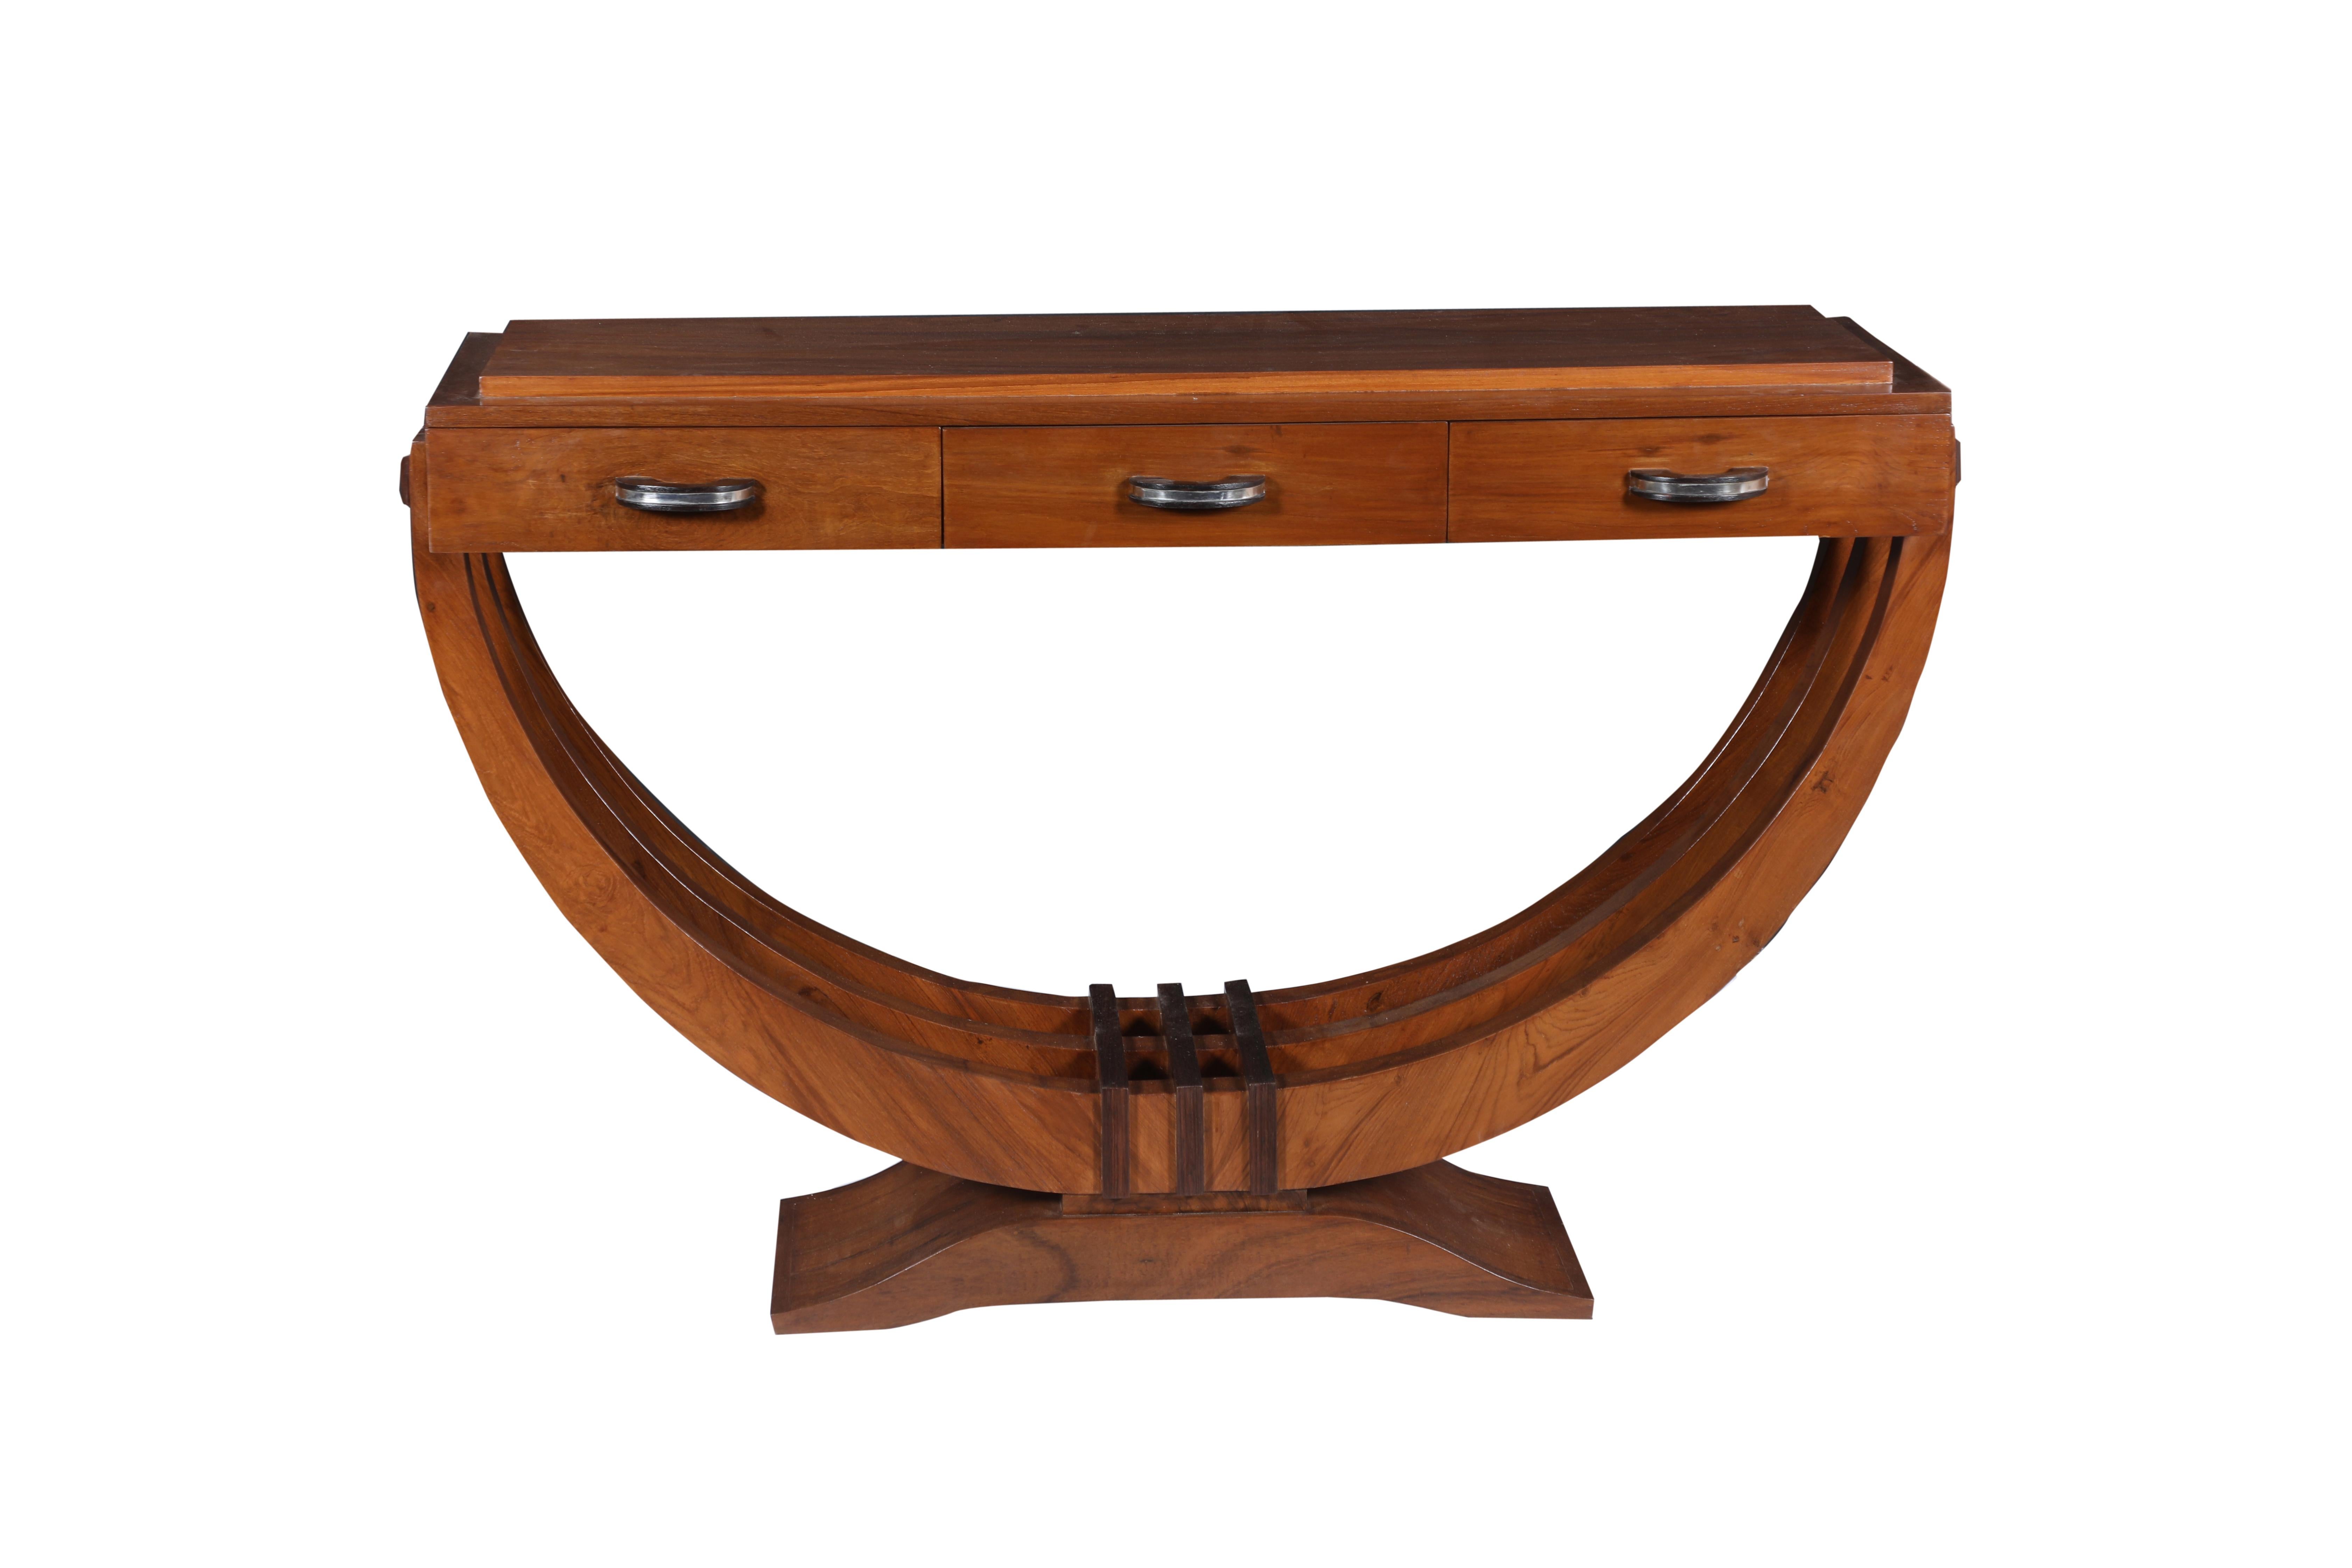 Elegant Mid-Century Modern teak U-shaped console or behind the sofa table. Three sweeping supports rest on a curved teak base with walnut details at the bottom and sides. Three front drawers with chrome and walnut drawer pulls. Refinished to an